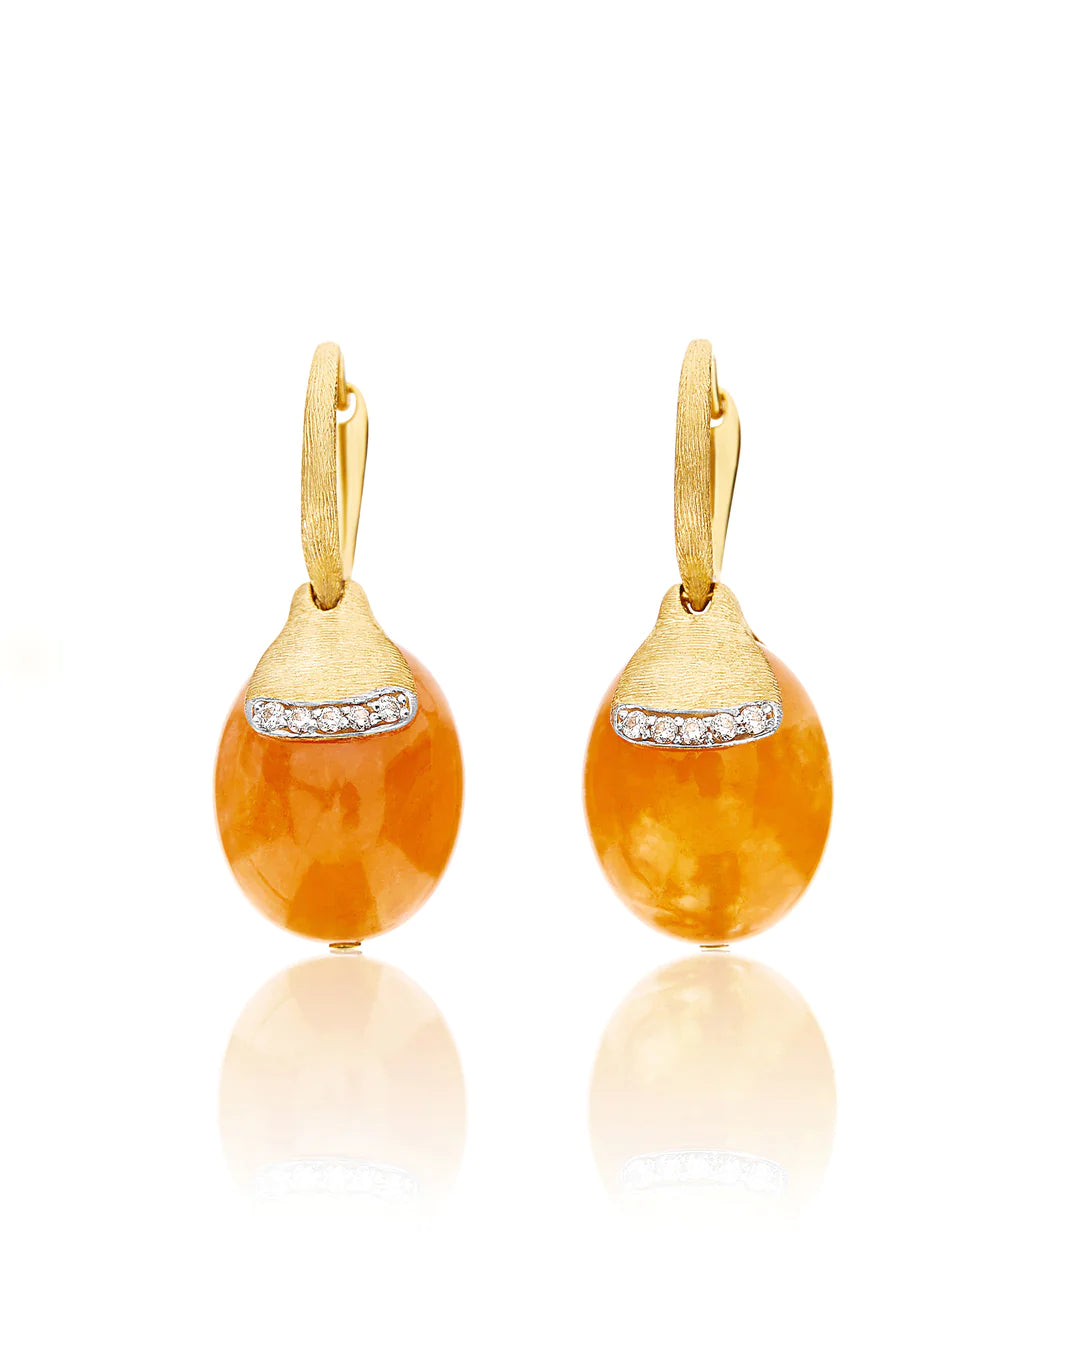 "PETRA" CILIEGINE GOLD AND ORANGE AVENTURINE BALL DROP EARRINGS WITH DIAMONDS DETAILS (LARGE)